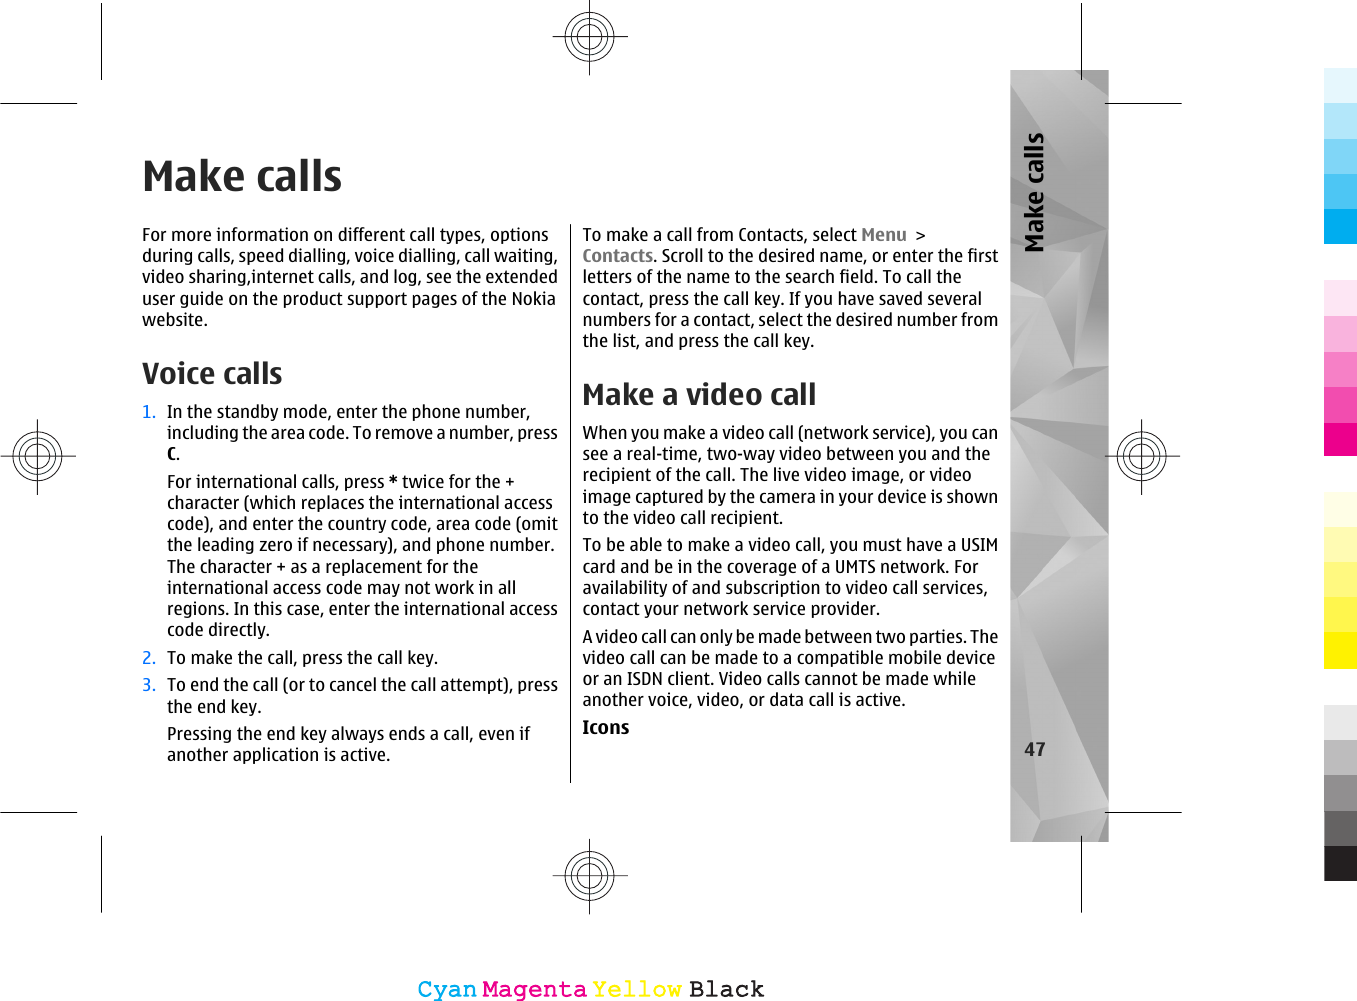 Make callsFor more information on different call types, optionsduring calls, speed dialling, voice dialling, call waiting,video sharing,internet calls, and log, see the extendeduser guide on the product support pages of the Nokiawebsite.Voice calls 1. In the standby mode, enter the phone number,including the area code. To remove a number, pressC.For international calls, press * twice for the +character (which replaces the international accesscode), and enter the country code, area code (omitthe leading zero if necessary), and phone number.The character + as a replacement for theinternational access code may not work in allregions. In this case, enter the international accesscode directly.2. To make the call, press the call key.3. To end the call (or to cancel the call attempt), pressthe end key.Pressing the end key always ends a call, even ifanother application is active.To make a call from Contacts, select Menu &gt;Contacts. Scroll to the desired name, or enter the firstletters of the name to the search field. To call thecontact, press the call key. If you have saved severalnumbers for a contact, select the desired number fromthe list, and press the call key.Make a video callWhen you make a video call (network service), you cansee a real-time, two-way video between you and therecipient of the call. The live video image, or videoimage captured by the camera in your device is shownto the video call recipient.To be able to make a video call, you must have a USIMcard and be in the coverage of a UMTS network. Foravailability of and subscription to video call services,contact your network service provider.A video call can only be made between two parties. Thevideo call can be made to a compatible mobile deviceor an ISDN client. Video calls cannot be made whileanother voice, video, or data call is active.Icons47Make callsCyanCyanMagentaMagentaYellowYellowBlackBlack